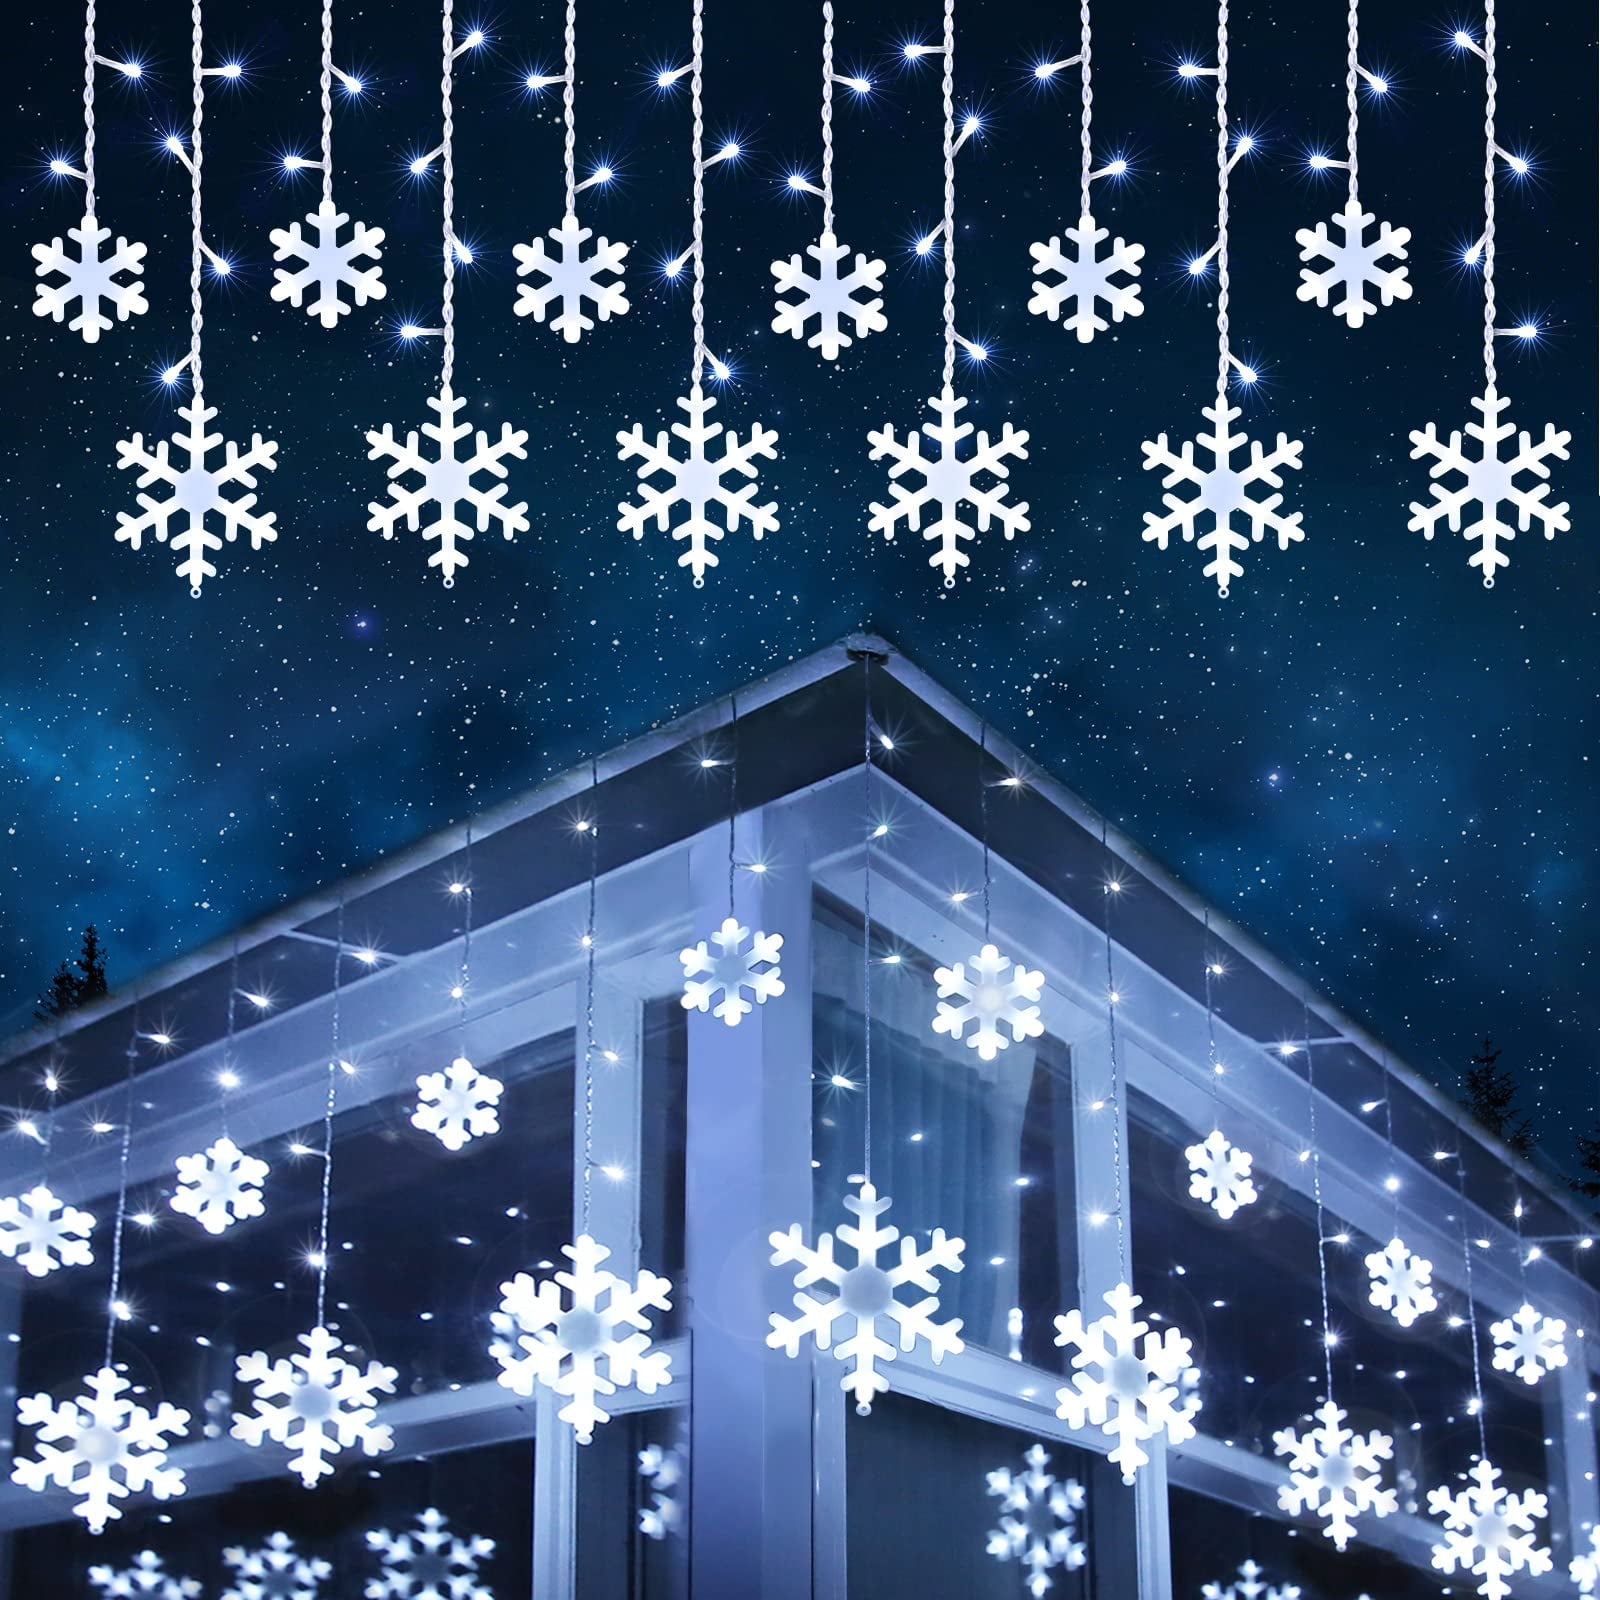 Christmas Snowflake Lights Outdoor, 17.22ft 264 LED Snowflake Icicle Lights  with 22 Drops, Connectable, Modes Waterproof White Christmas Lights for  Curtain, Eaves, Window, Xmas Decorations